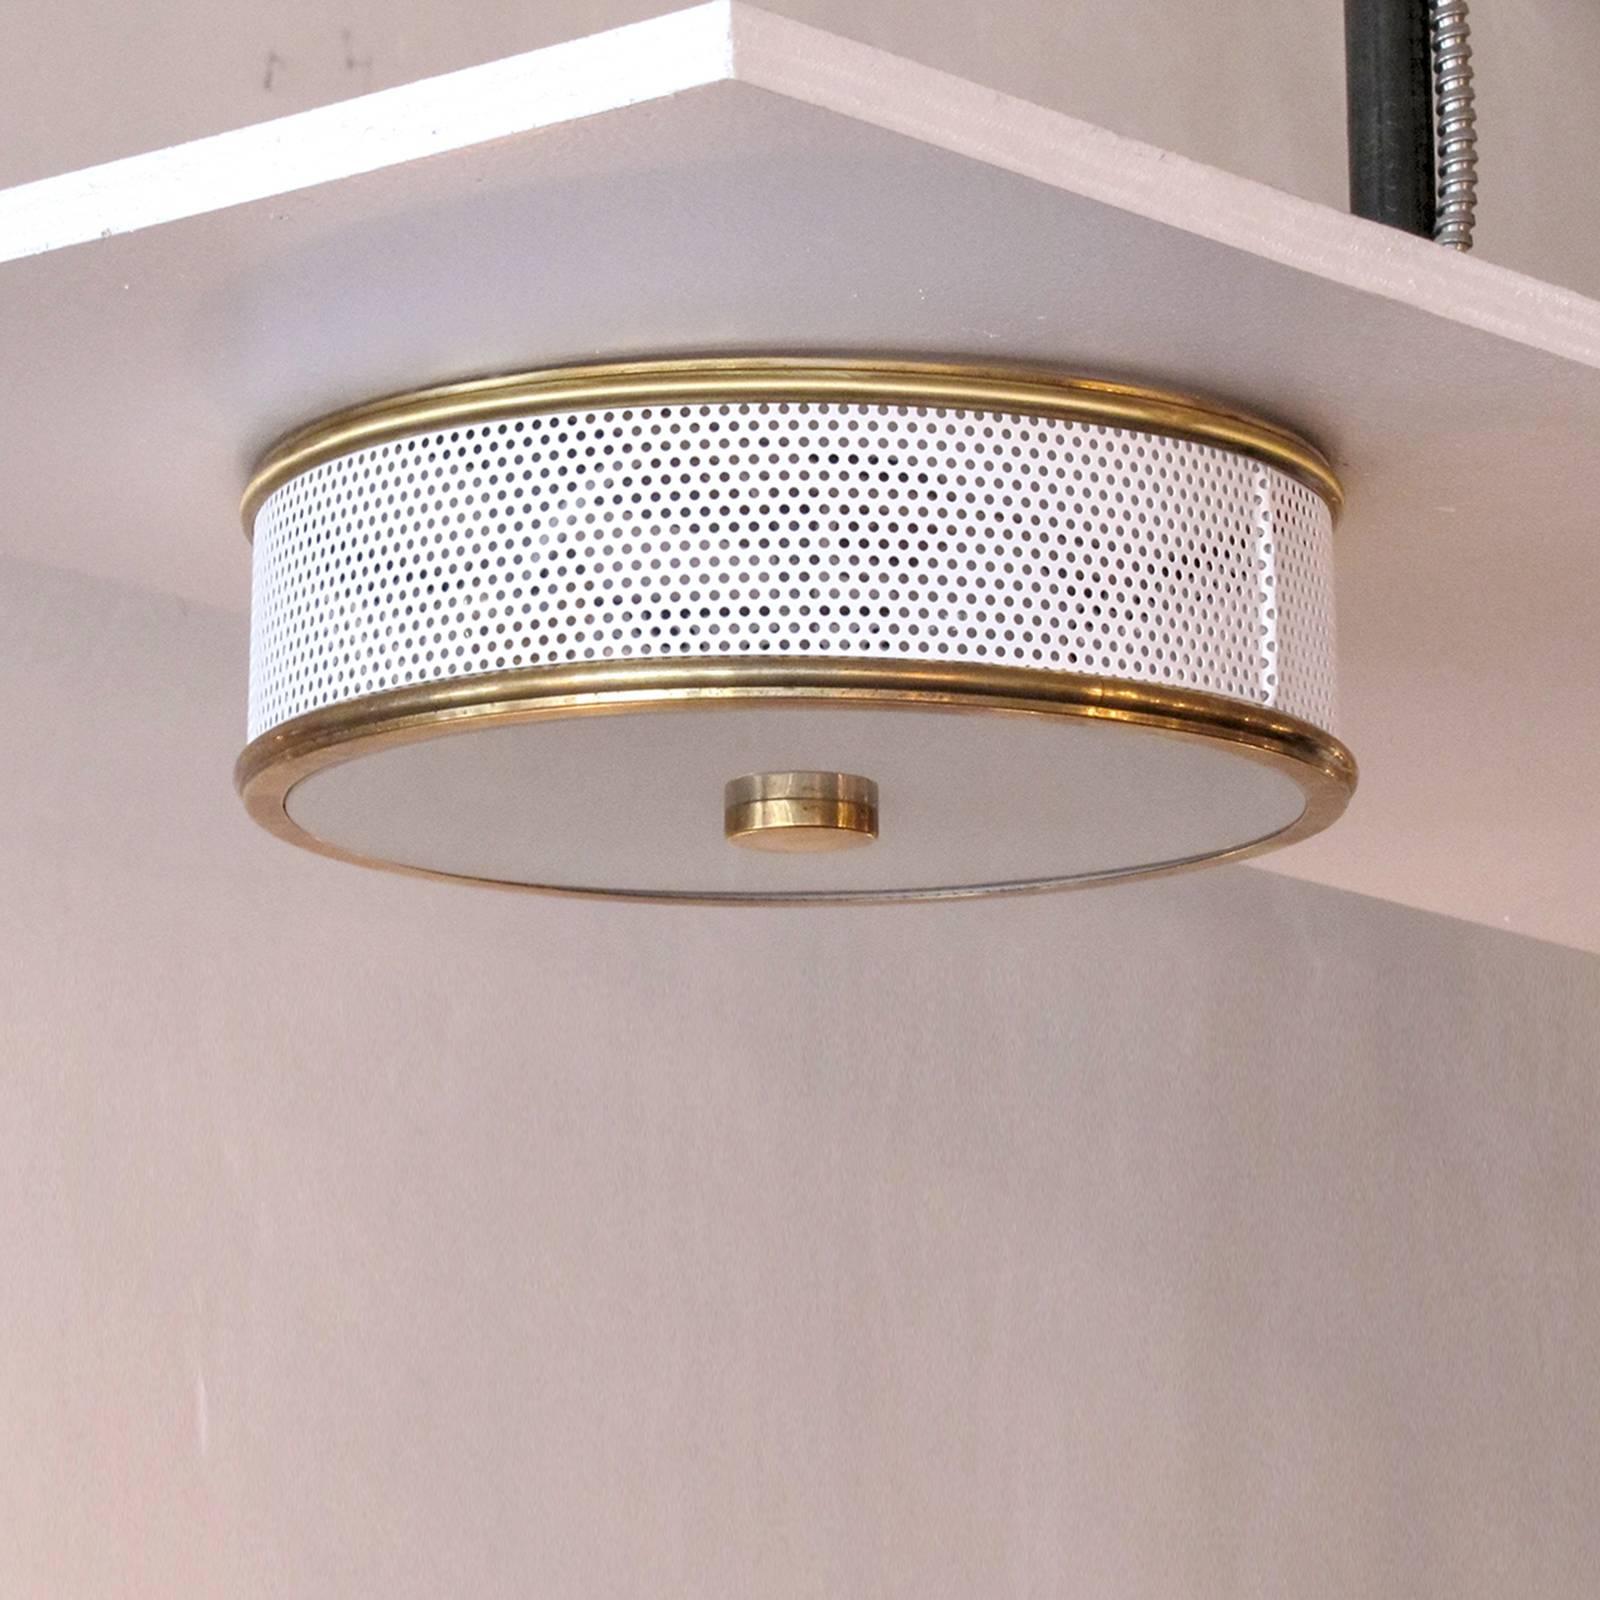 elegant flush mount ceiling light attributed to Mathieu Mategot, perforated enameled metal ring with brass rims and sandblasted glass disc